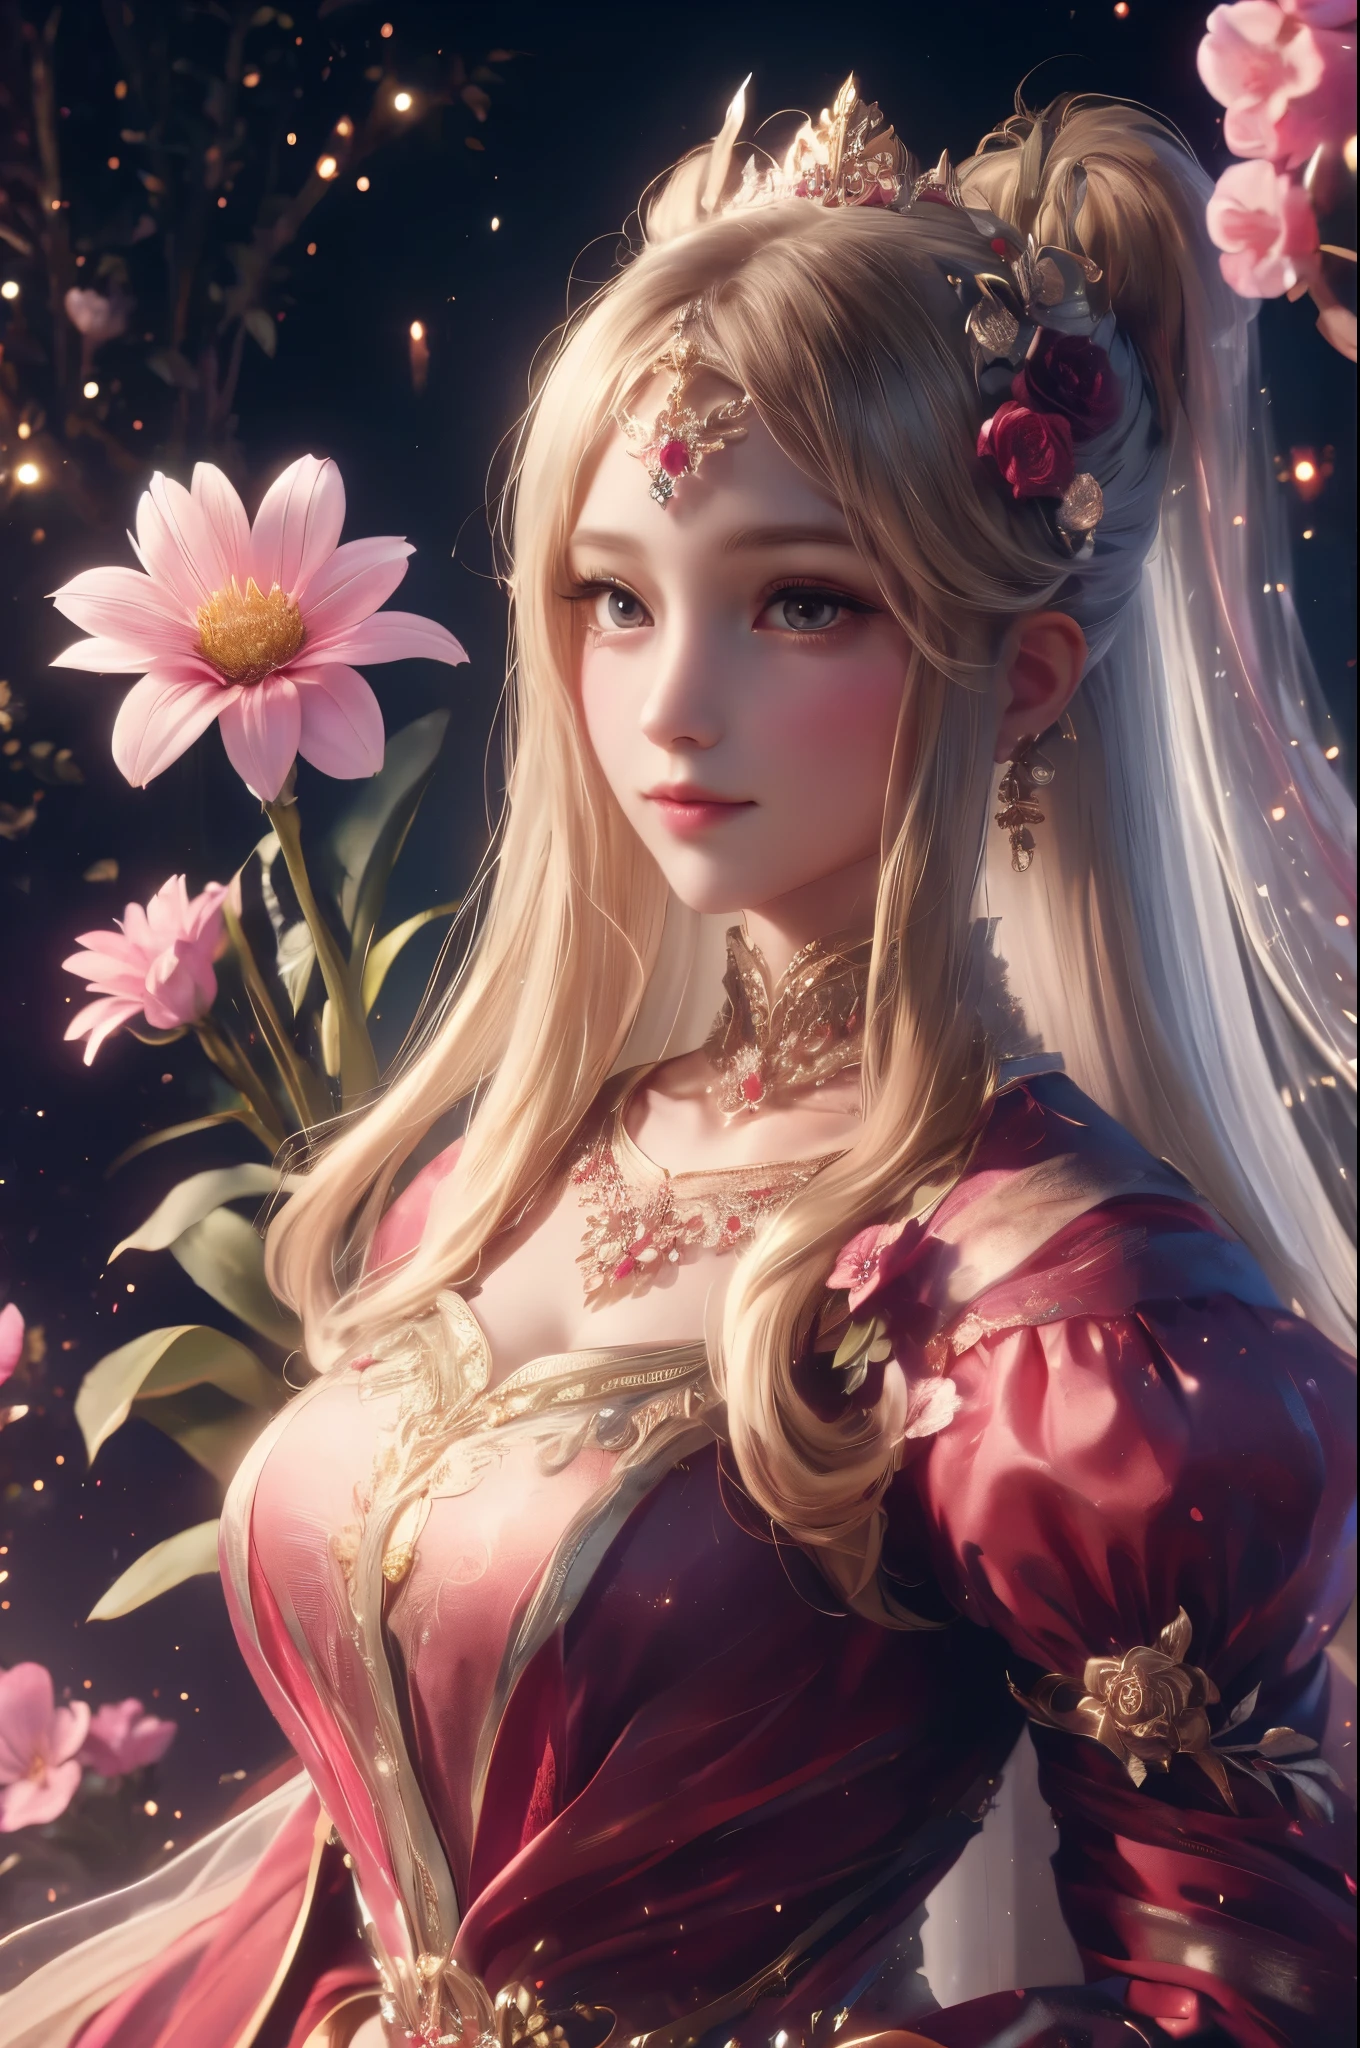 with gold embroidery. She has a delicate and graceful posture, standing in a blooming flower garden. The garden is filled with vibrant colors, featuring various types of flowers, such as roses, tulips, and daisies. The sunlight gently shines through the leaves, creating a warm and picturesque atmosphere. The princess's face is adorned with a soft smile, radiating elegance and kindness. Her eyes sparkle with a hint of curiosity and intelligence. Her lips are perfectly shaped and painted with a subtle pink tone. The high-quality image showcases every intricate detail of her face and dress, emphasizing the fine embroidery and fabric texture. The painting style of the artwork is a fusion of classical and impressionistic elements, imbuing the piece with a timeless beauty. The color palette leans towards pastel shades, enhancing the dreamlike and ethereal quality of the scene. The lighting is soft and balanced, accentuating the princess's features and casting a gentle glow on the surrounding flowers. All these elements combine to create a captivating and enchanting portrait of the young princess in the garden.